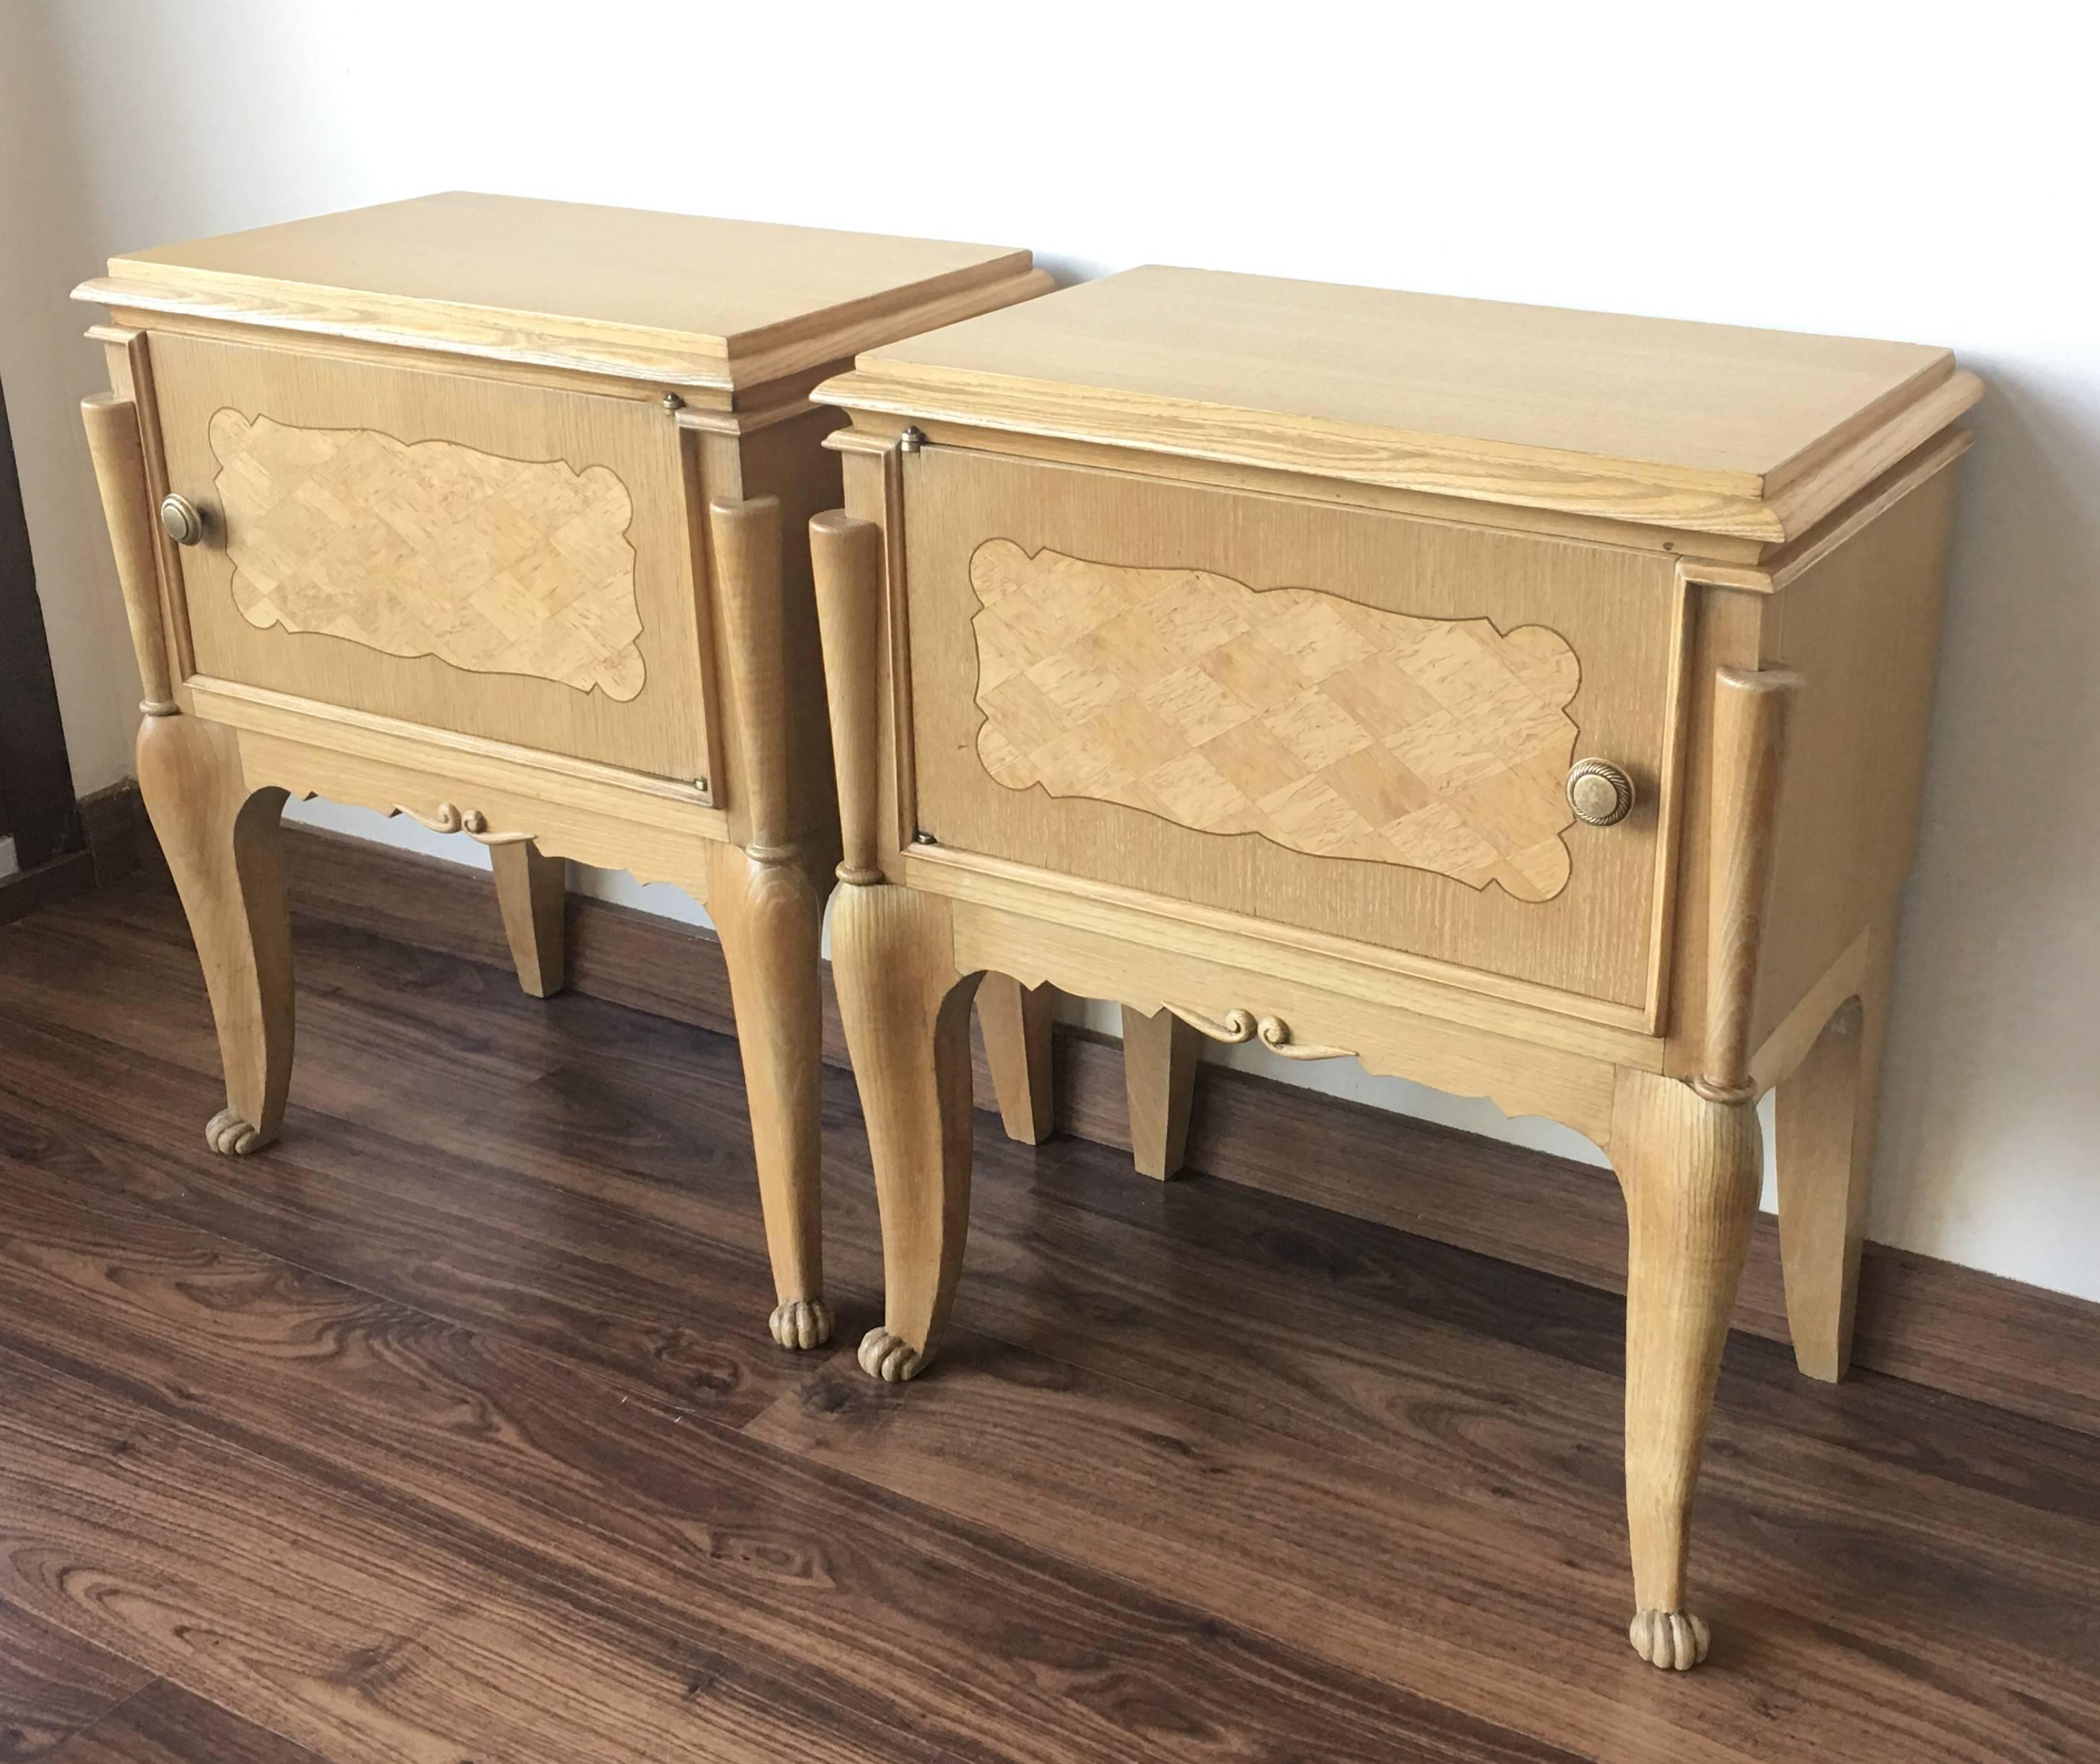 Early 20th century pair of nightstands or side tables with one door and marquetry for a plenty of storage to hold anything you may want close at hand. Original handles golden brass.
Restored and polished.